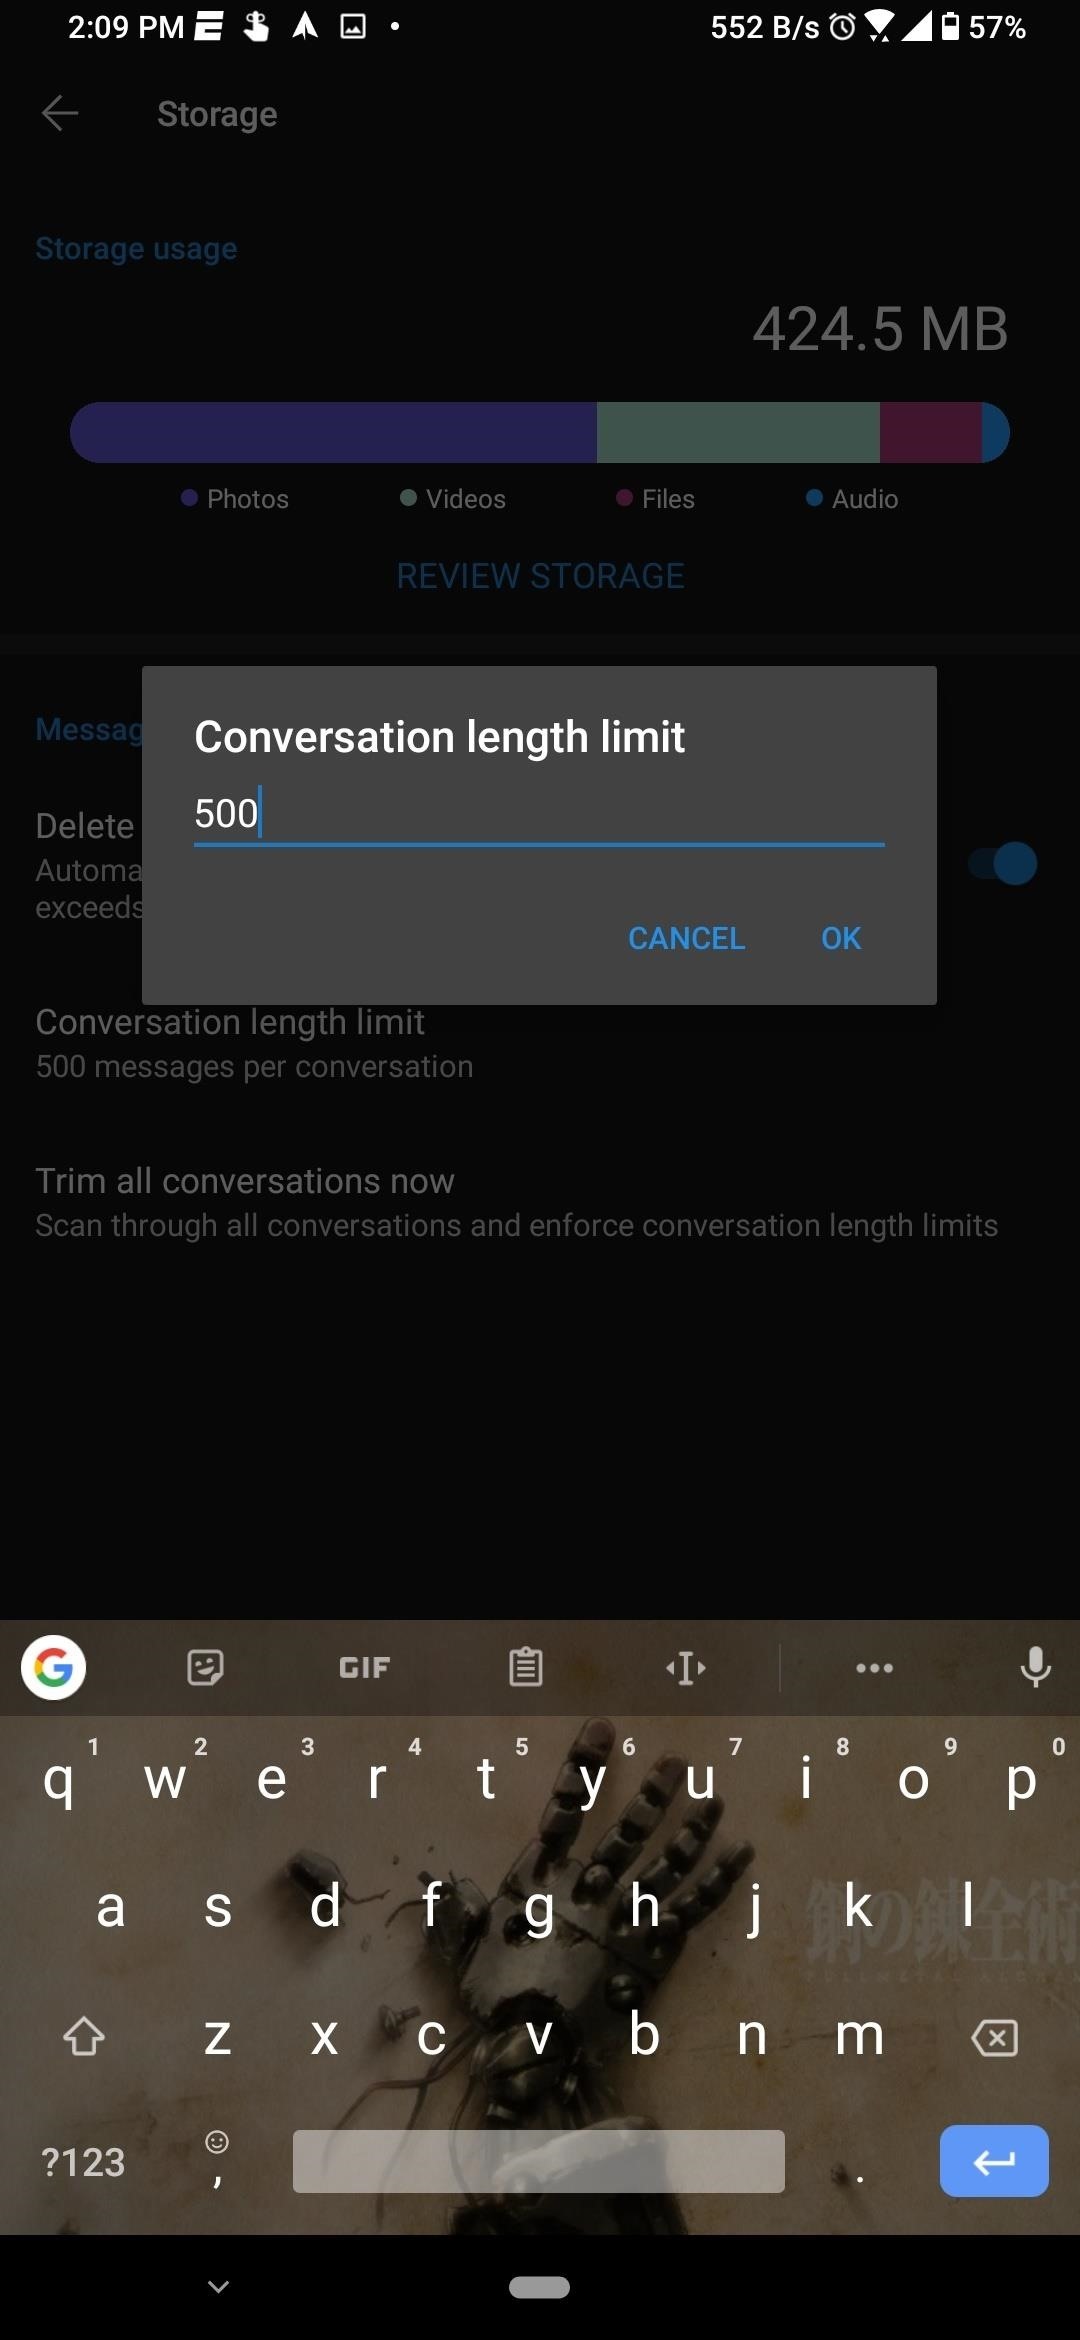 How to Automatically Delete Signal Messages to Save Storage Space